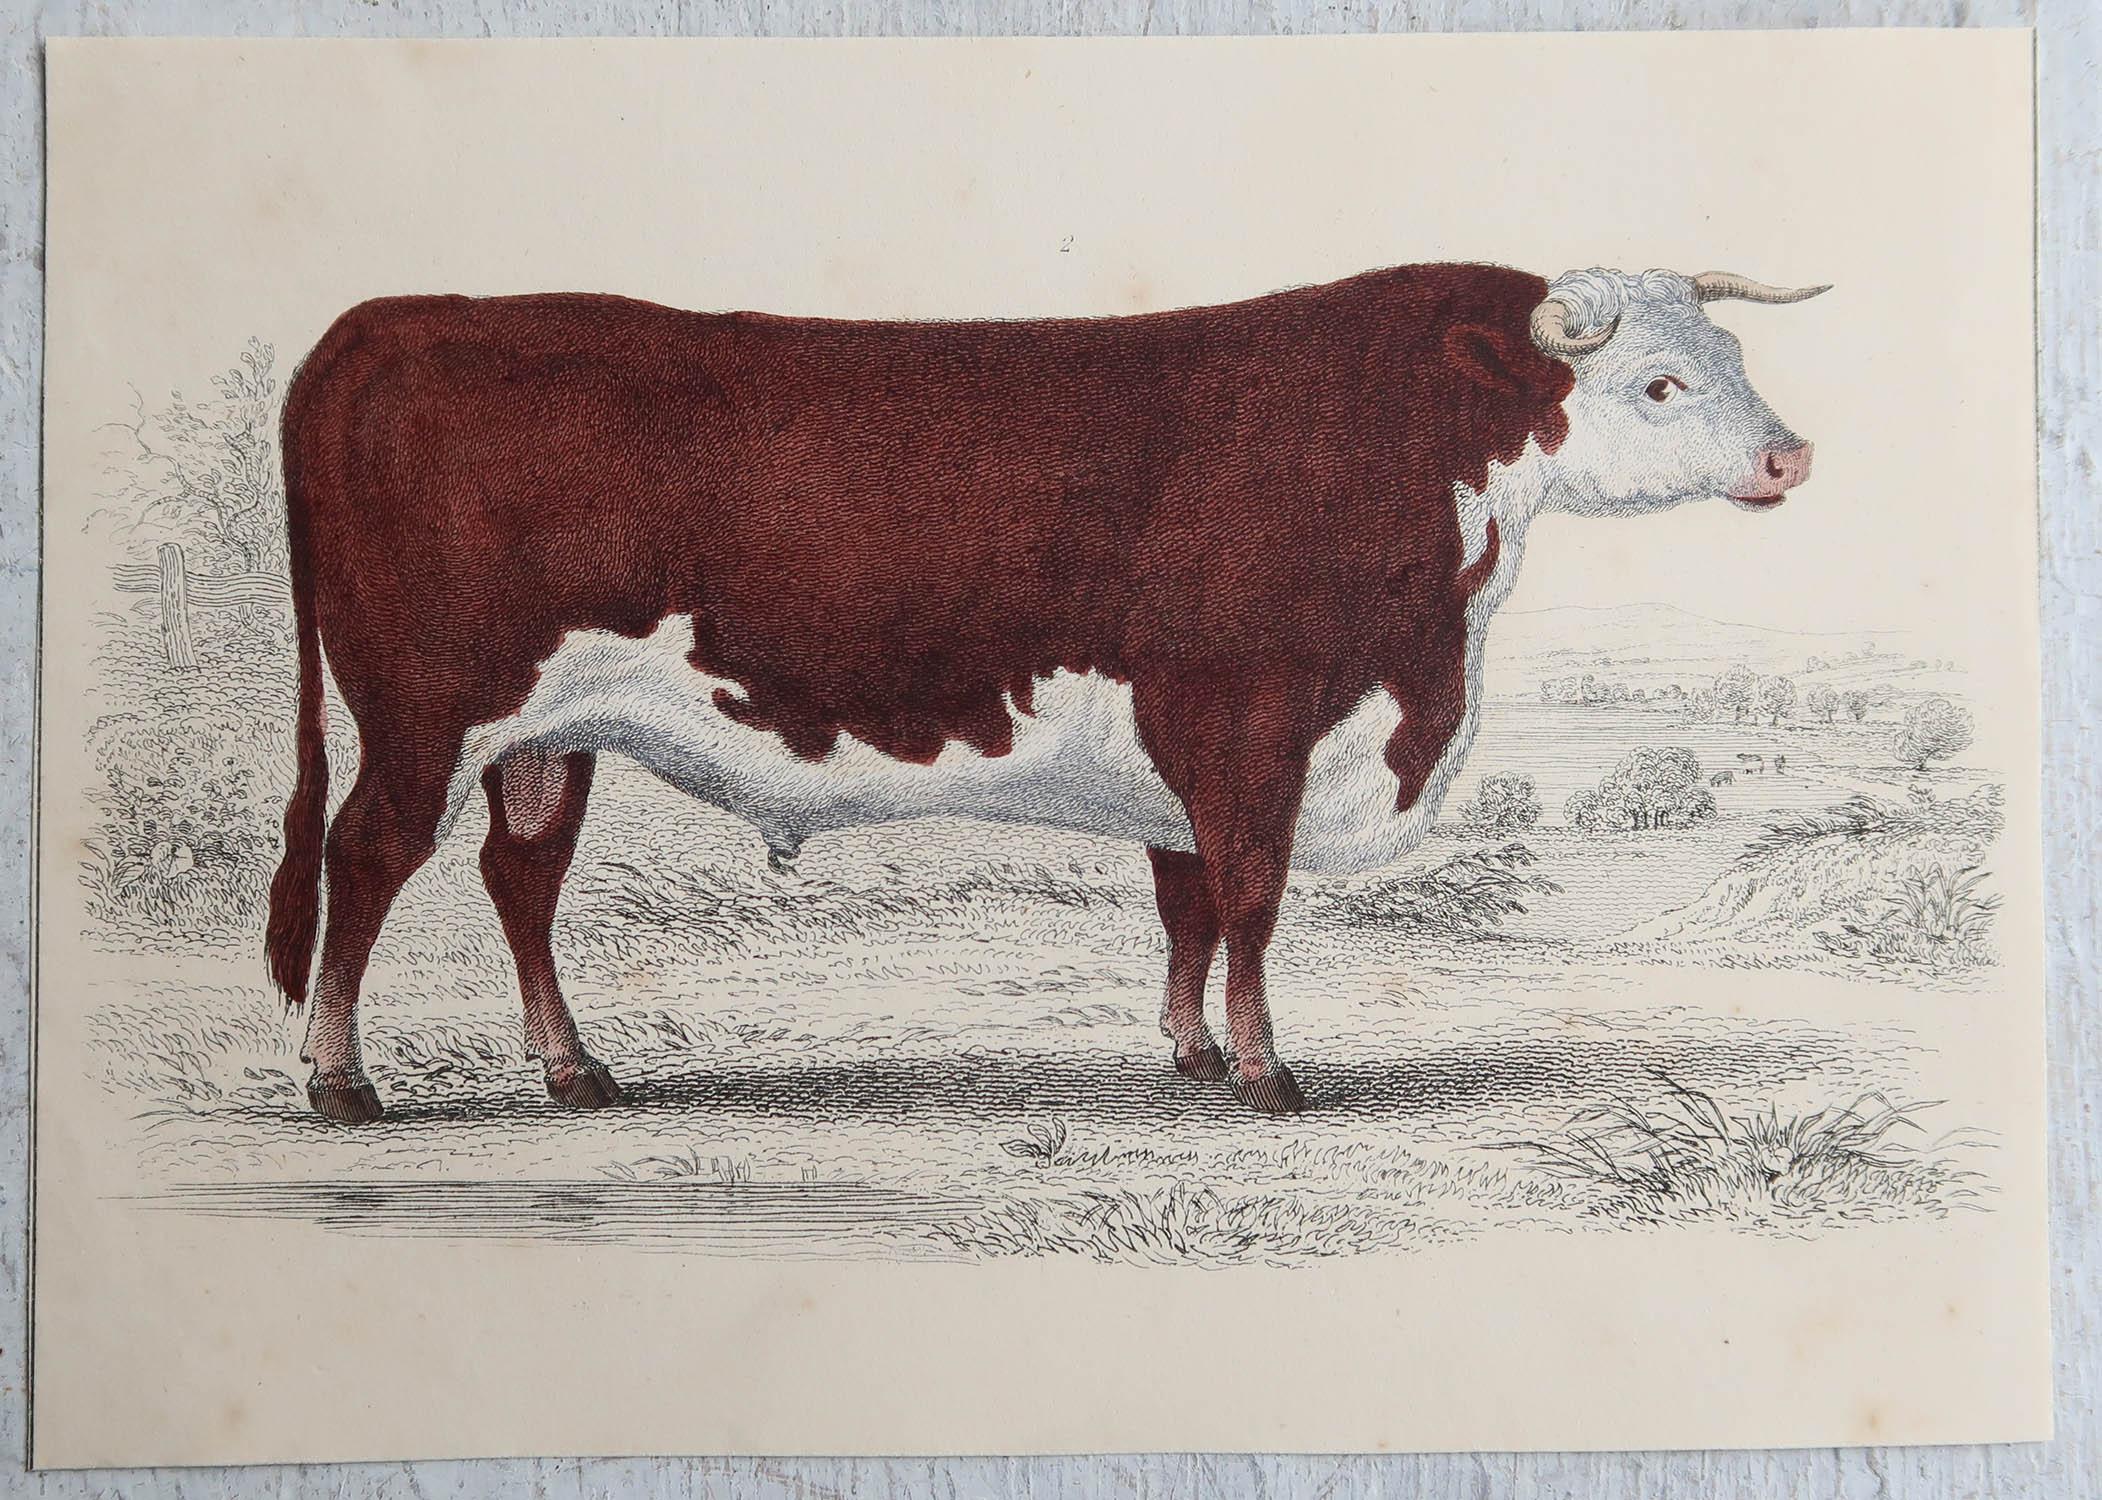 English Original Antique Print of a Hereford Bull, 1847 'Unframed'